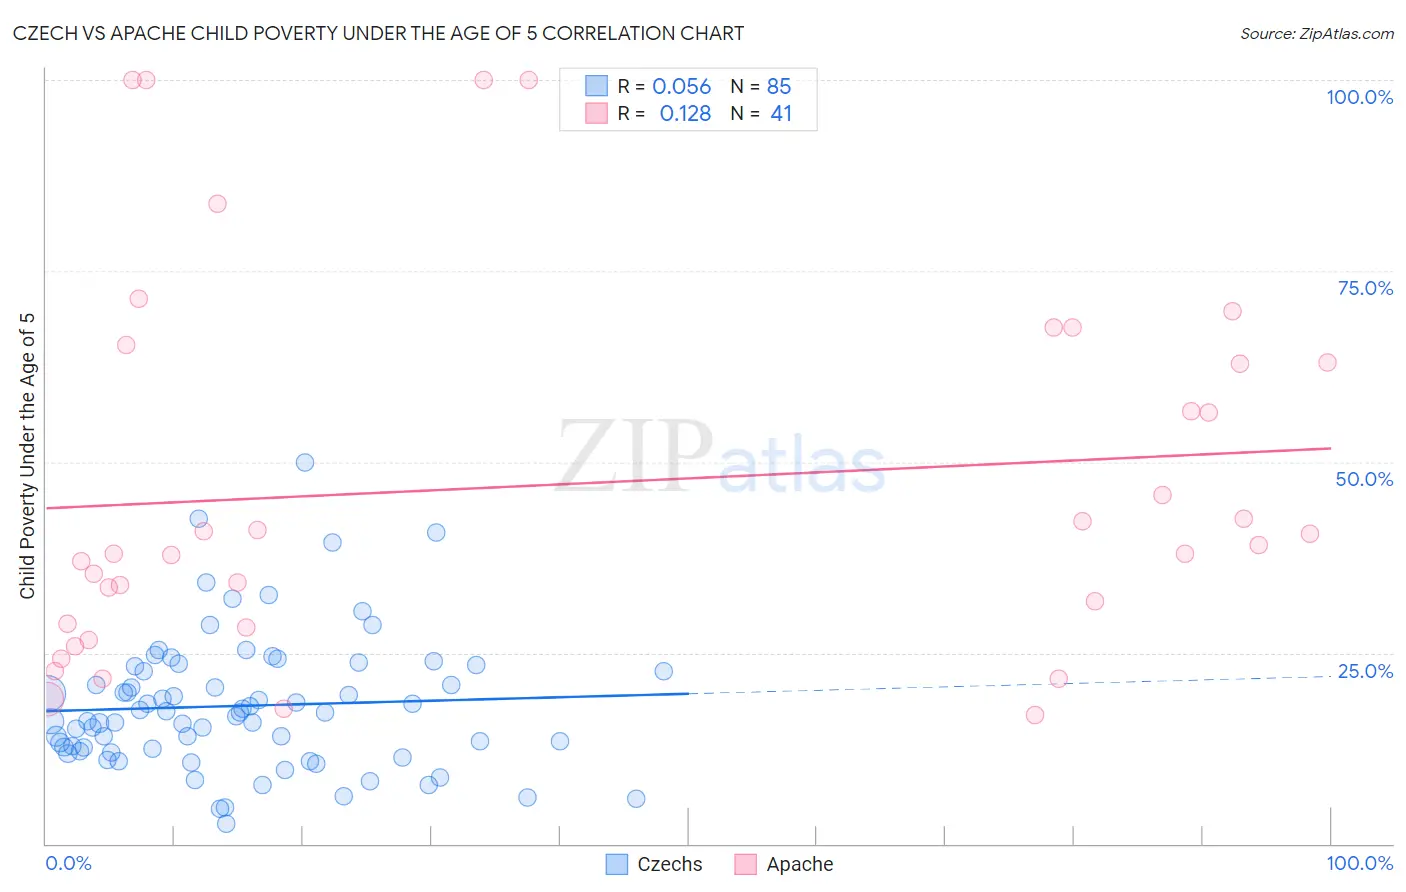 Czech vs Apache Child Poverty Under the Age of 5